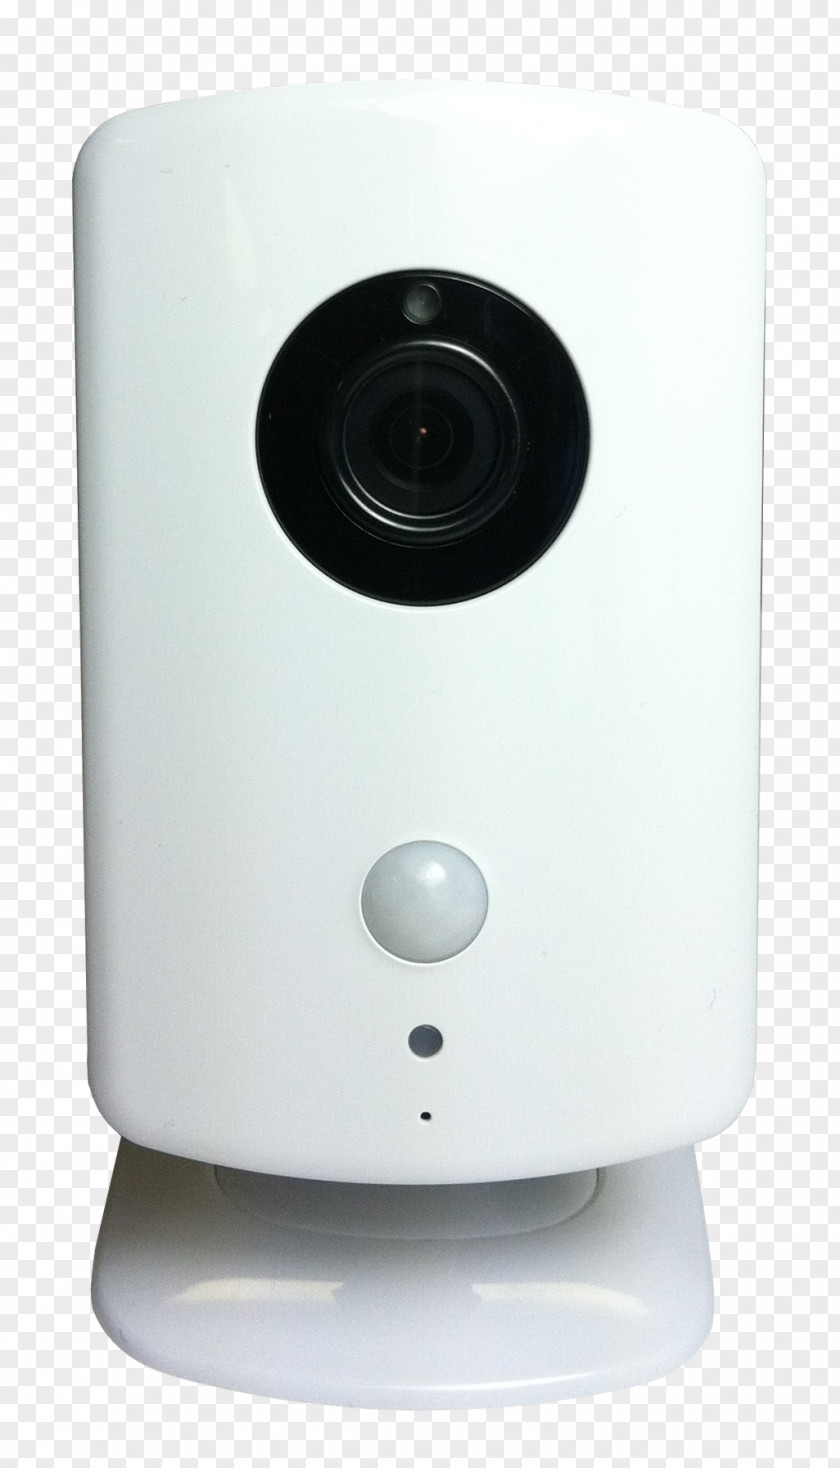 Hd Camera Security Alarms & Systems Home Automation Kits Alarm.com PNG